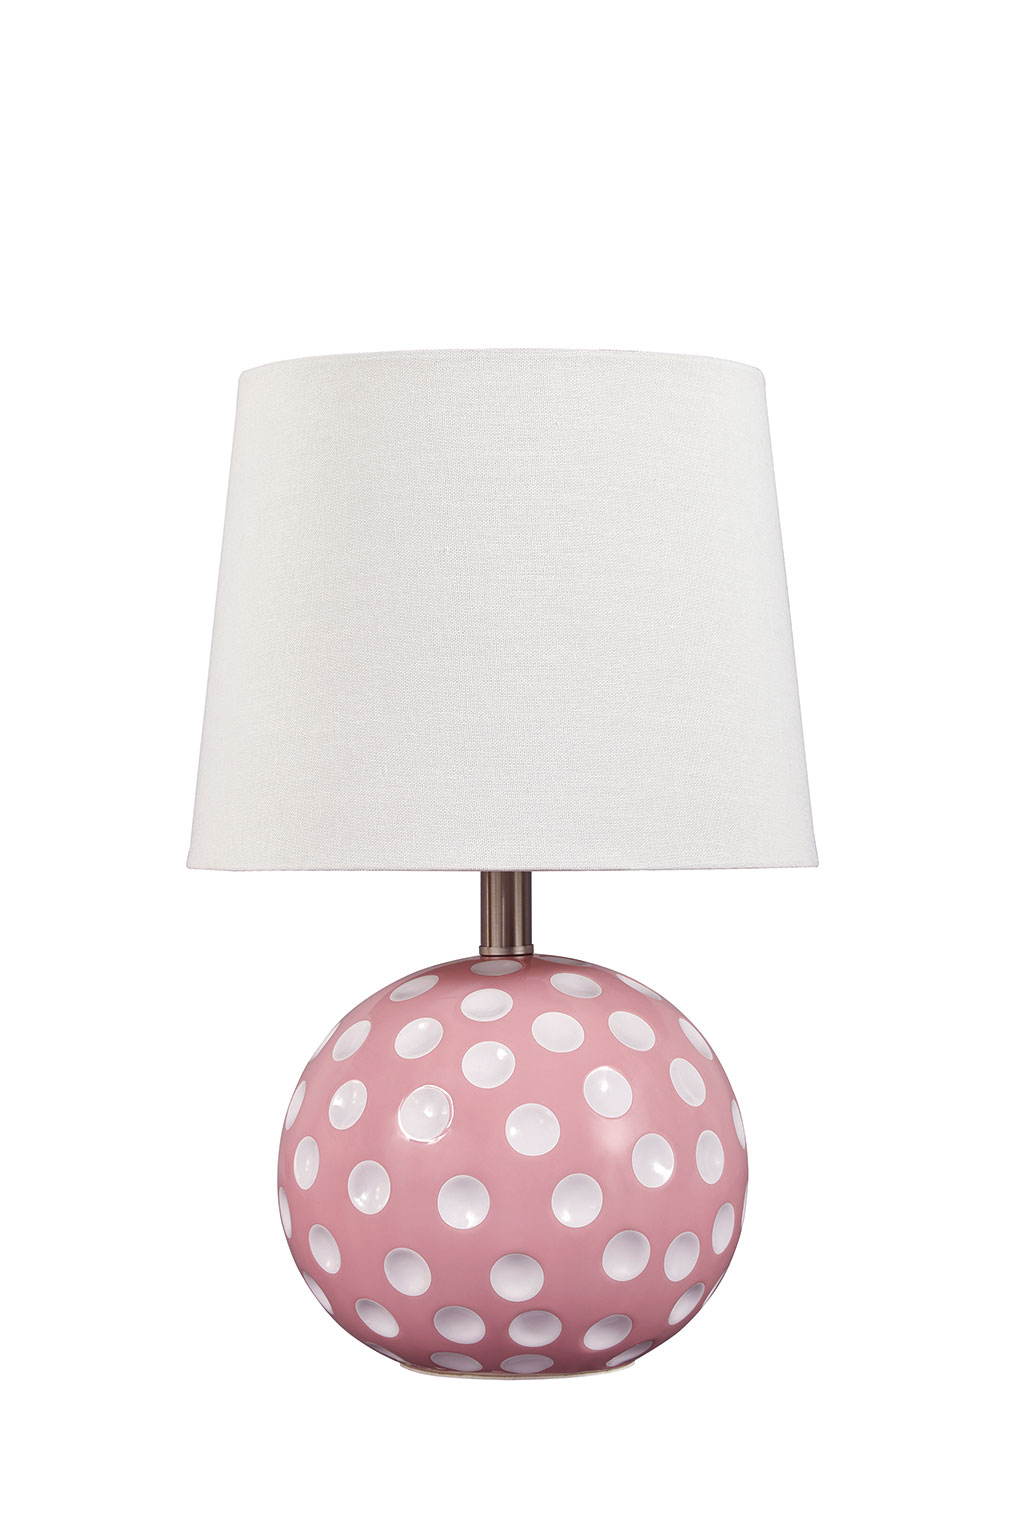 L800174 Table Lamp - Pink